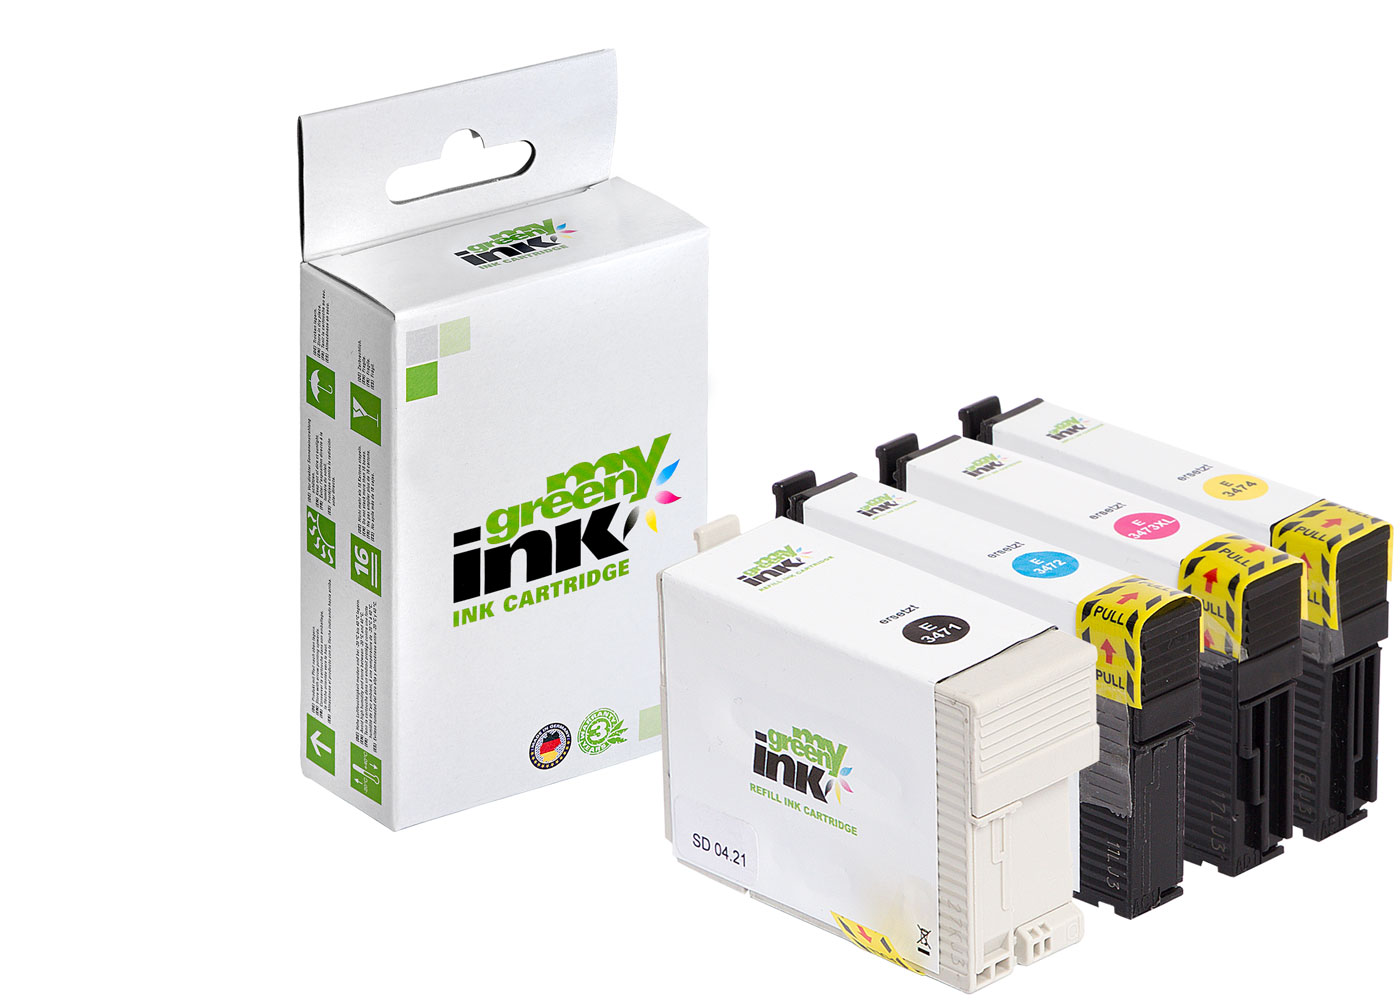 Refill ink cartridge for Epson WorkForce Pro WF 3720/3725